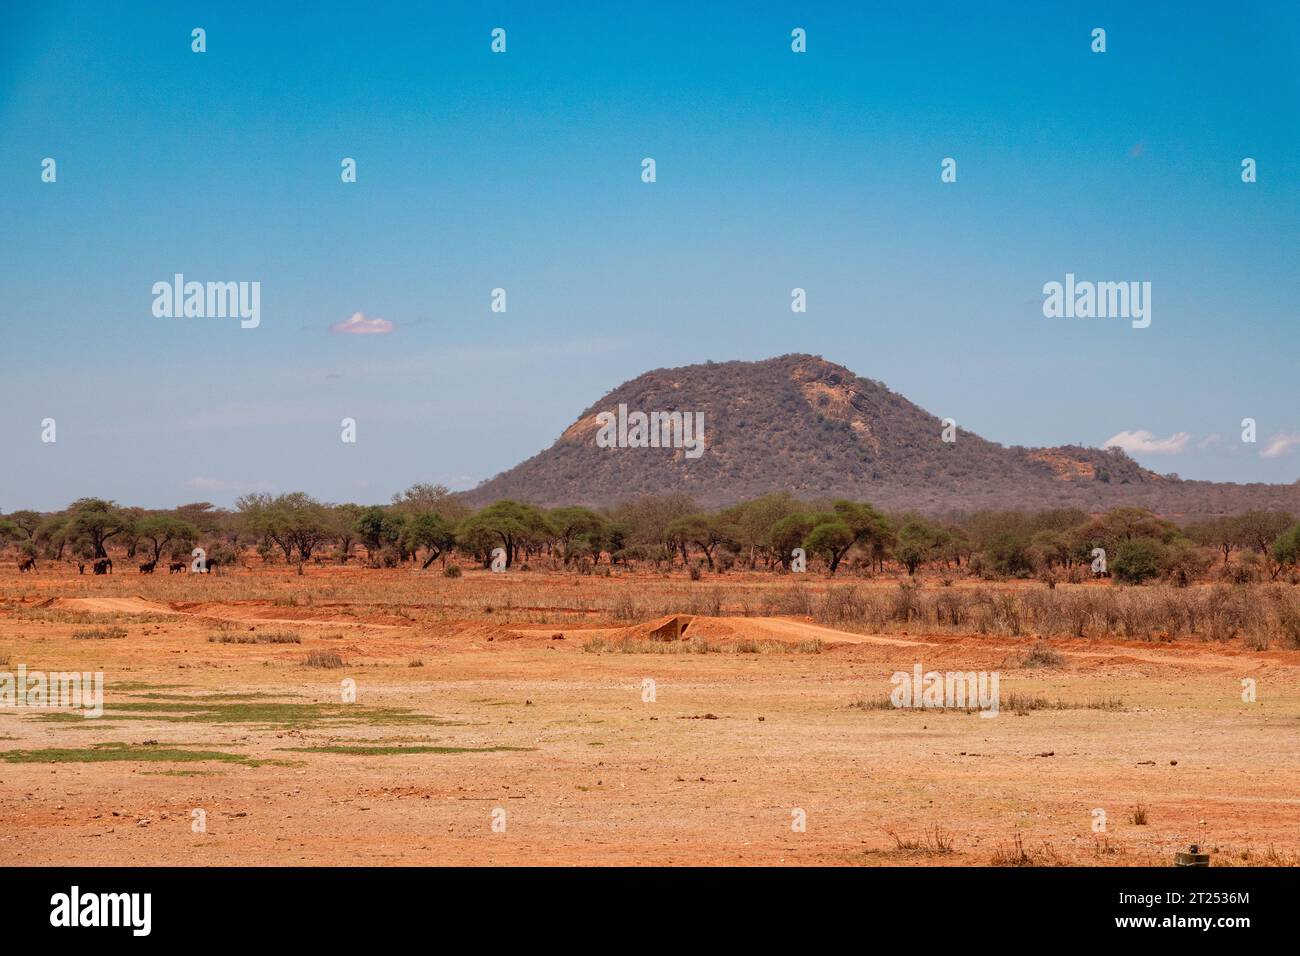 Scenic view of Acaia trees growing in arid landscapes of Tsavo West National Park, Kenya Stock Photo